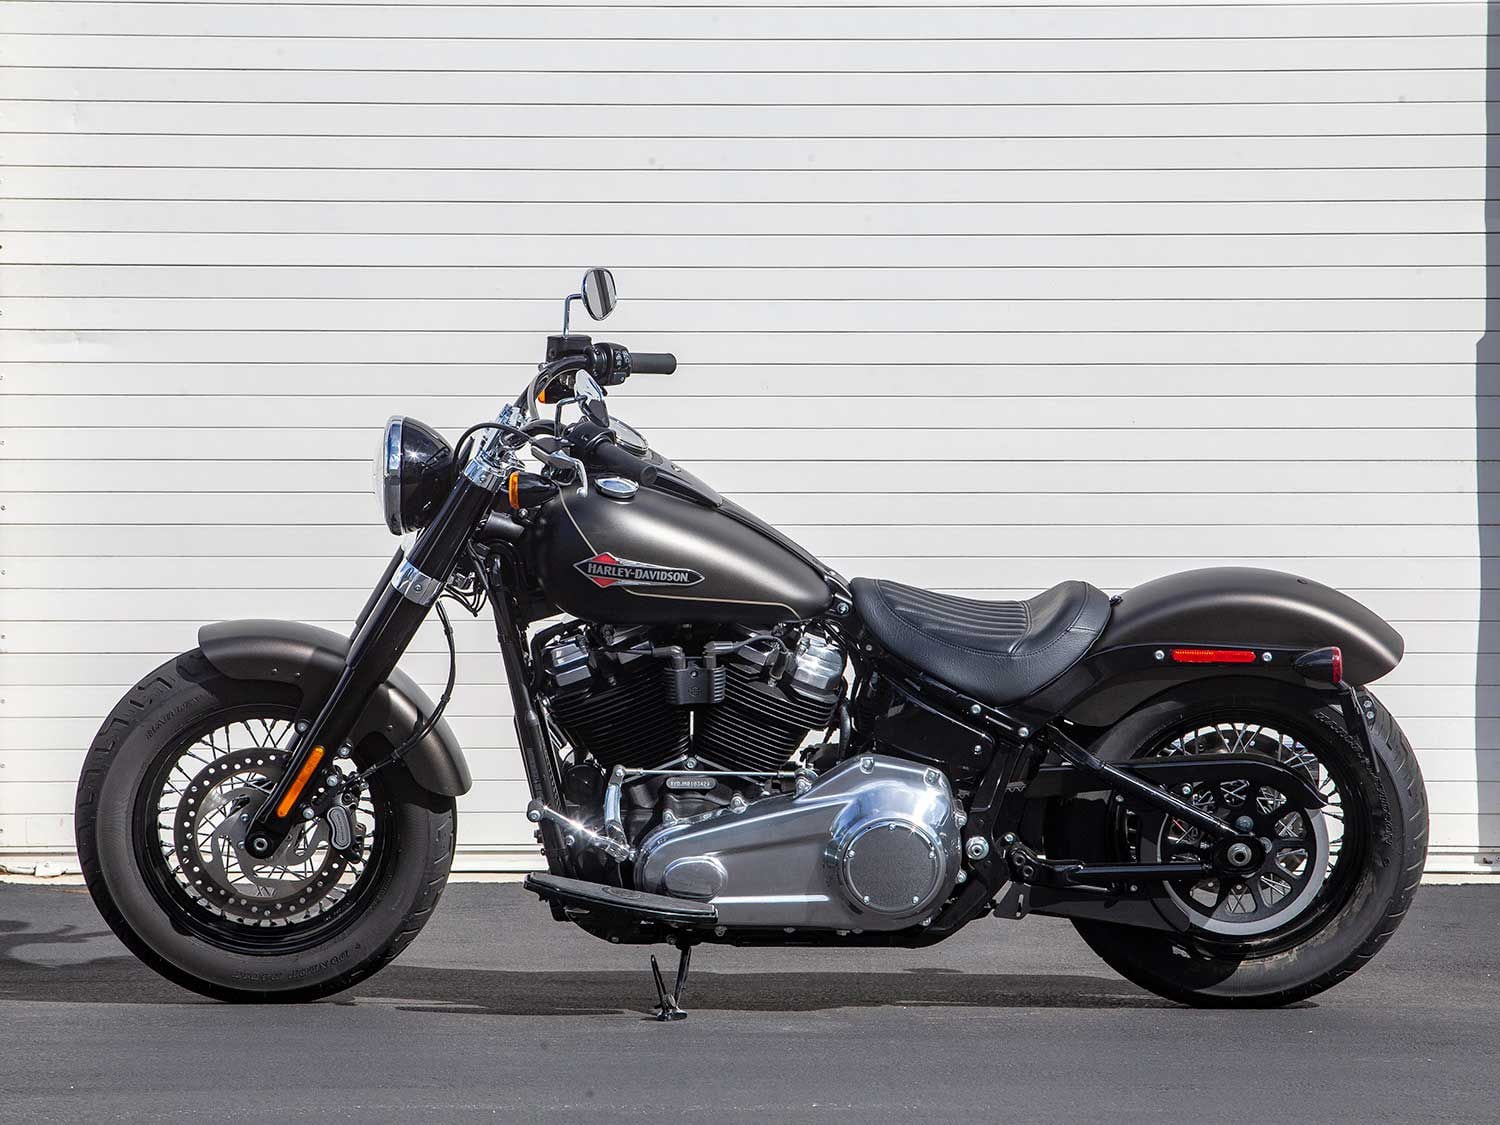 In this episode of <em>MC Commute</em>, we review the 2021 Harley-Davidson Softail Slim.